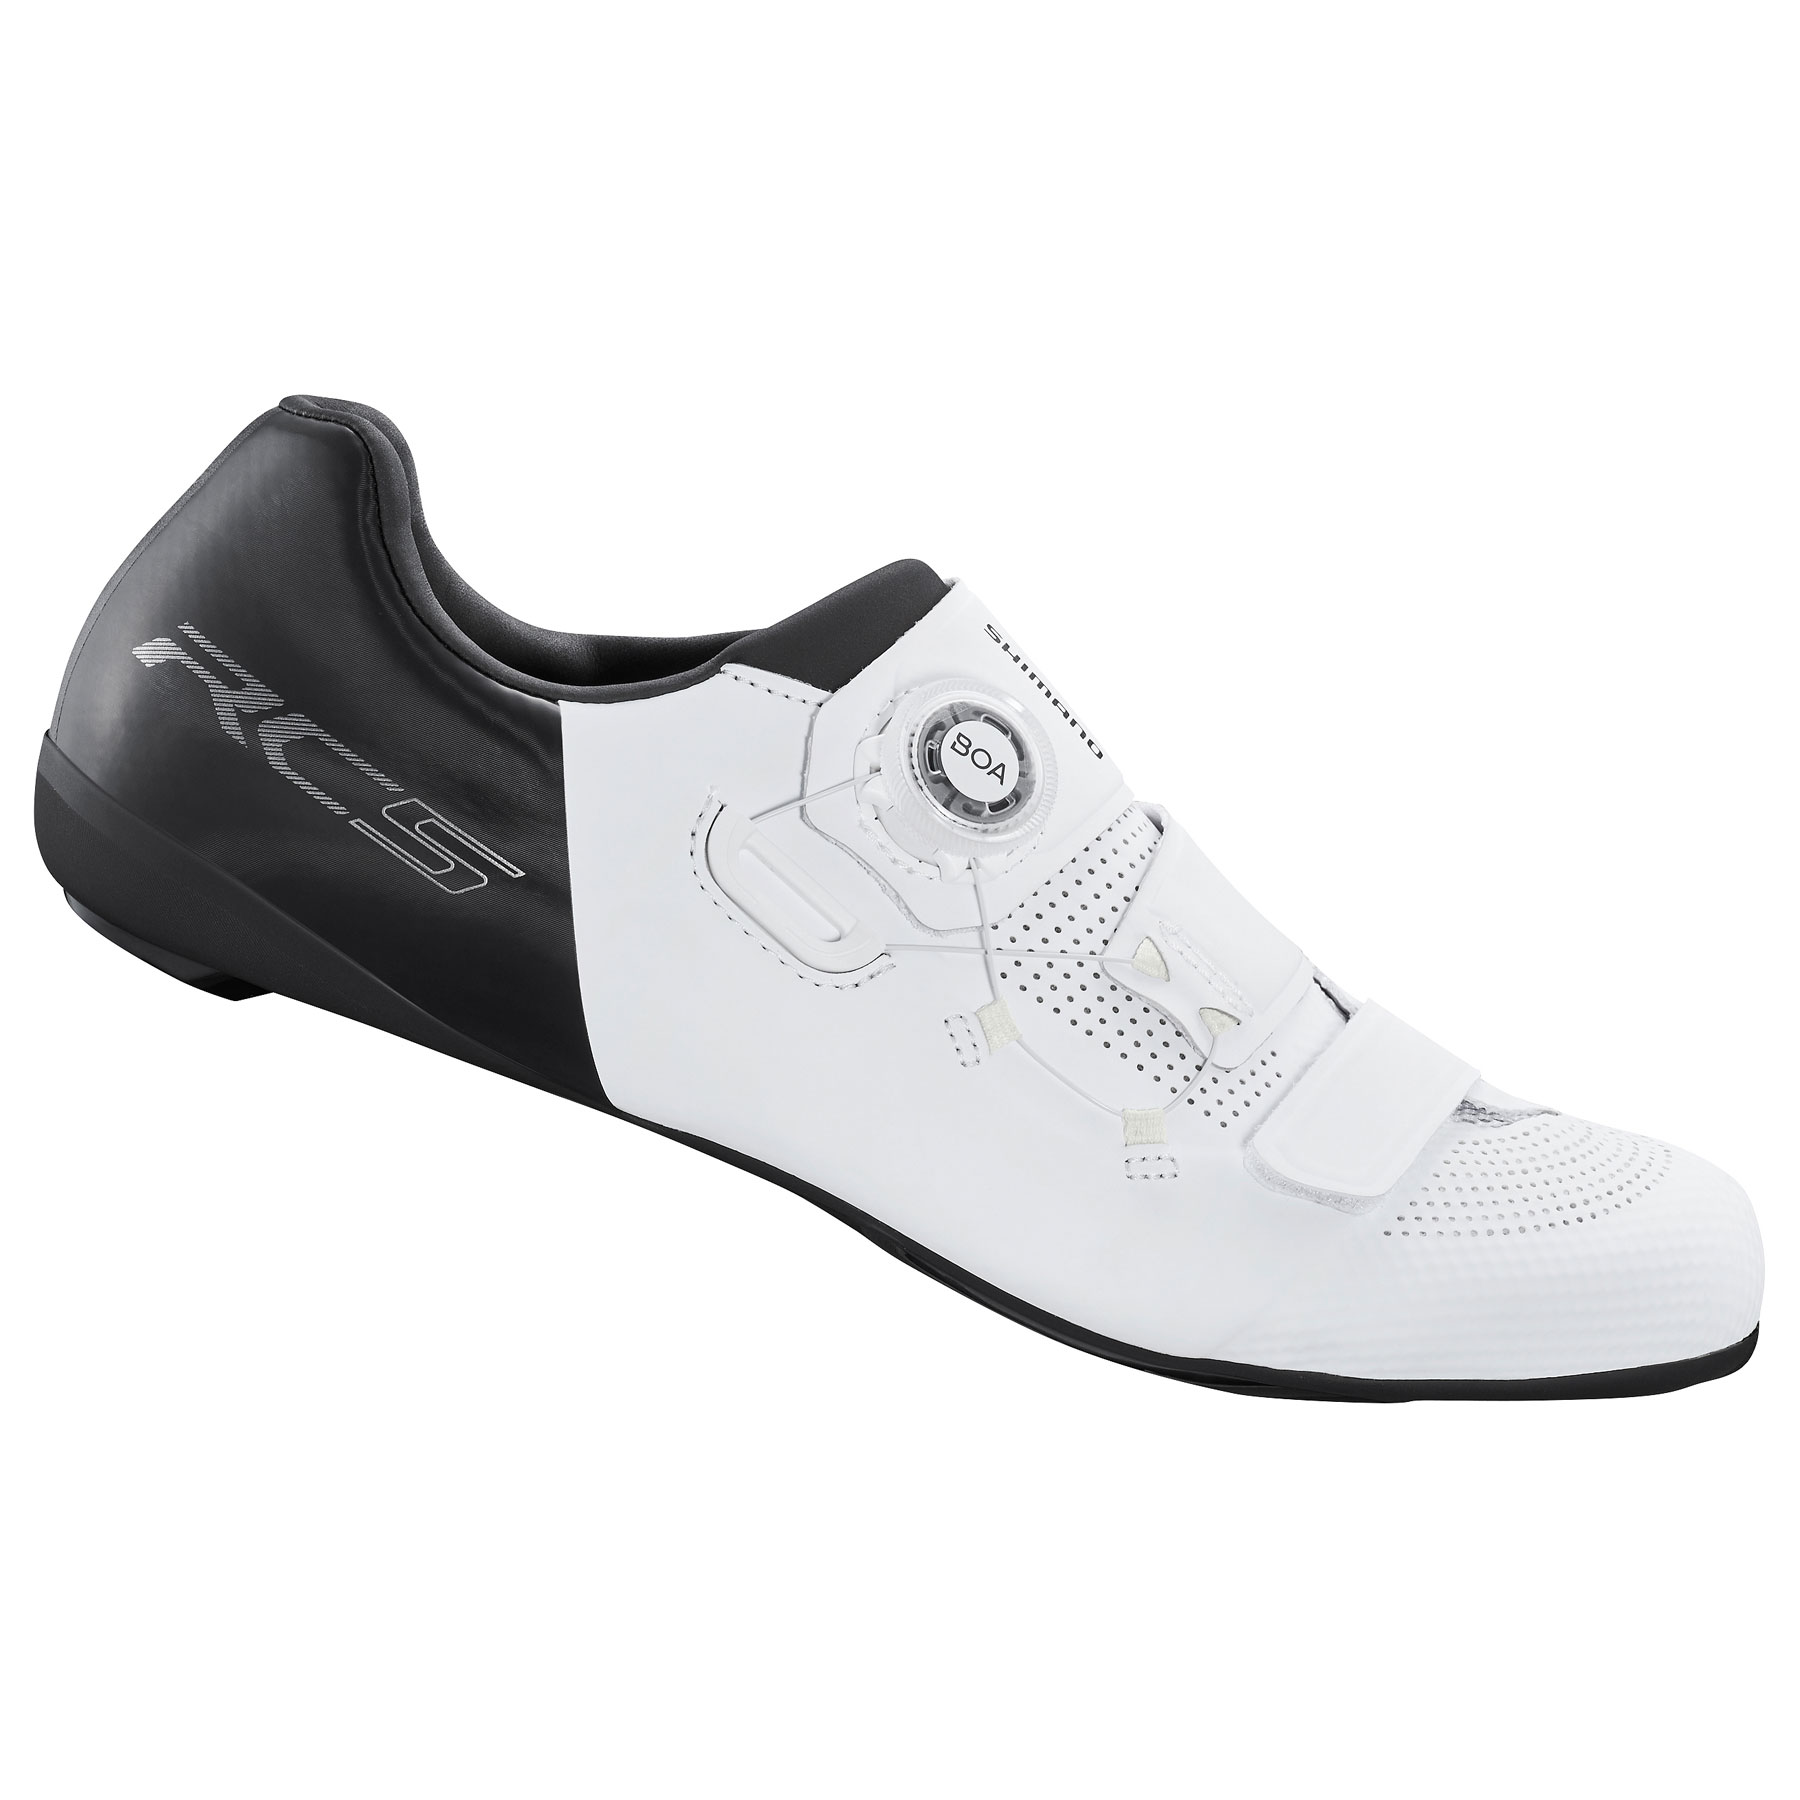 Picture of Shimano SH-RC502 Road Bike Shoes Men - Wide - white